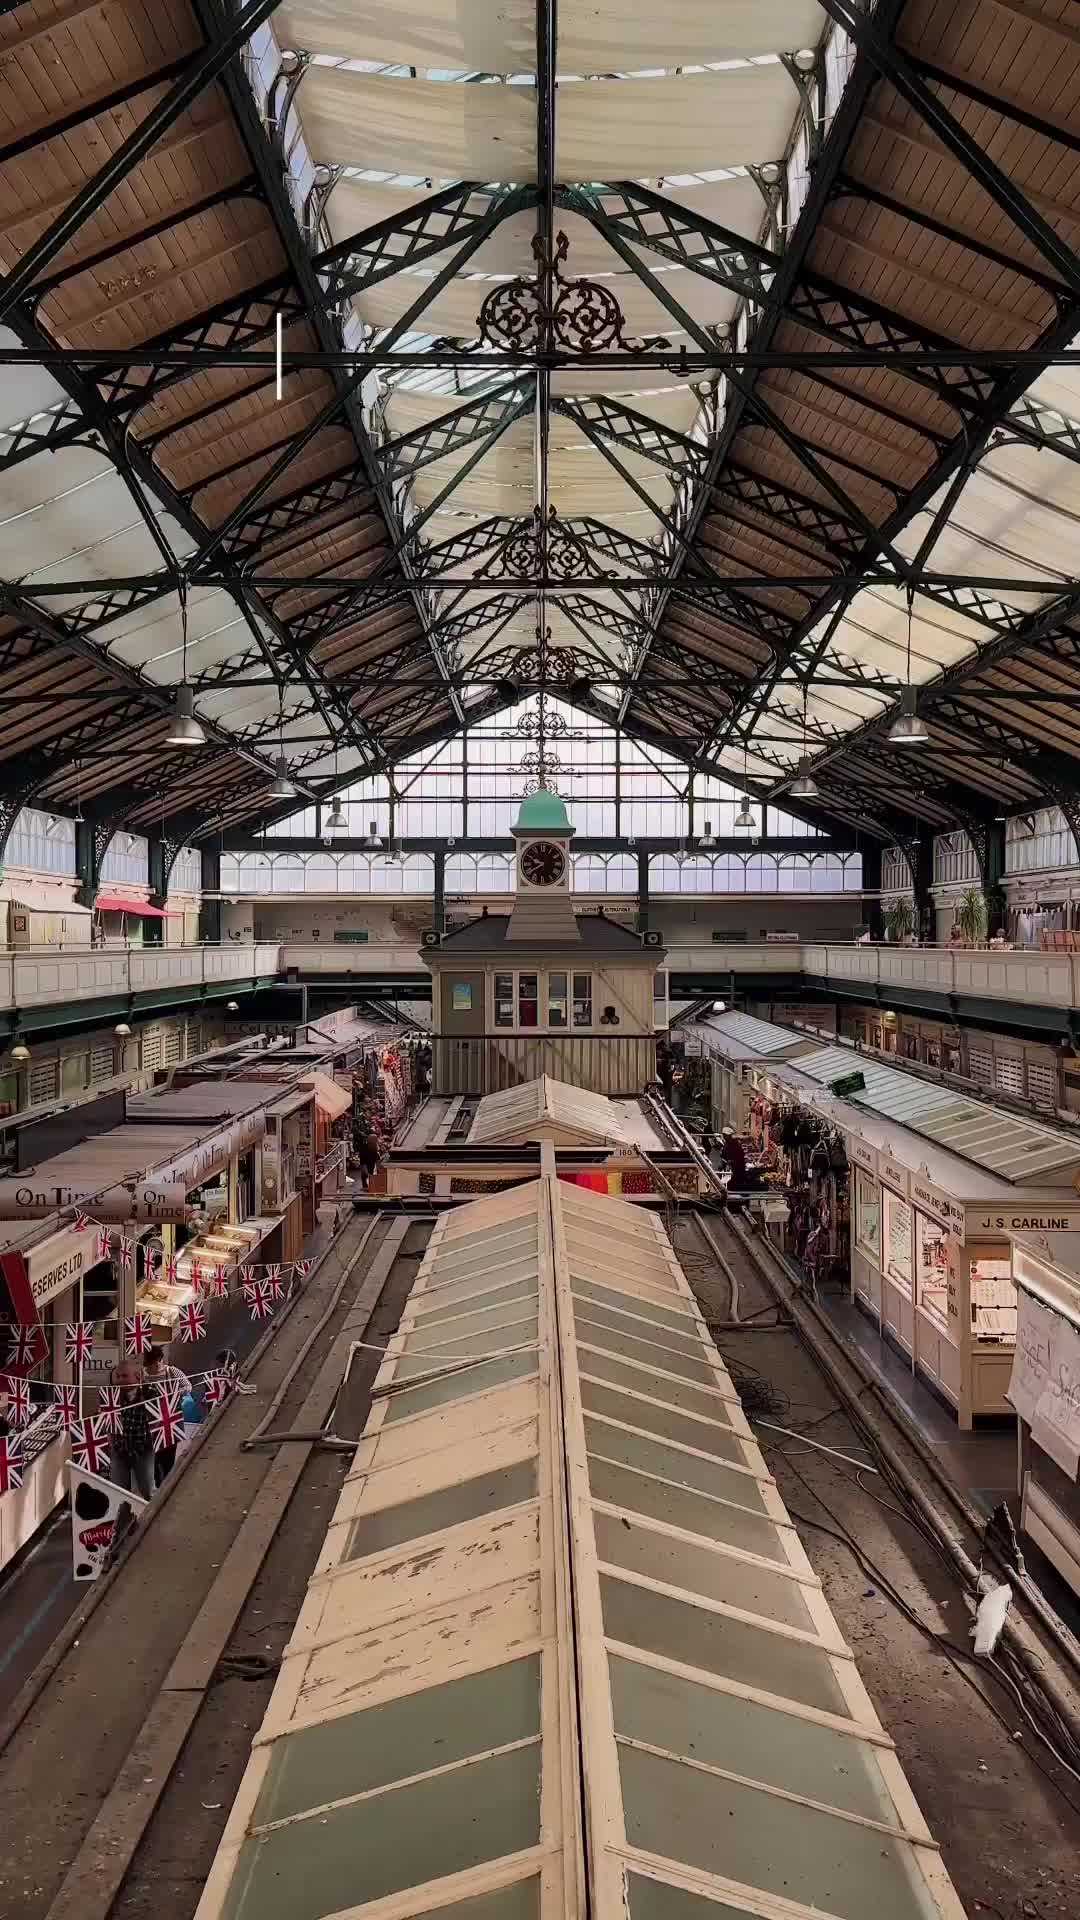 Explore Cardiff Market: A Victorian Gem in the City Center